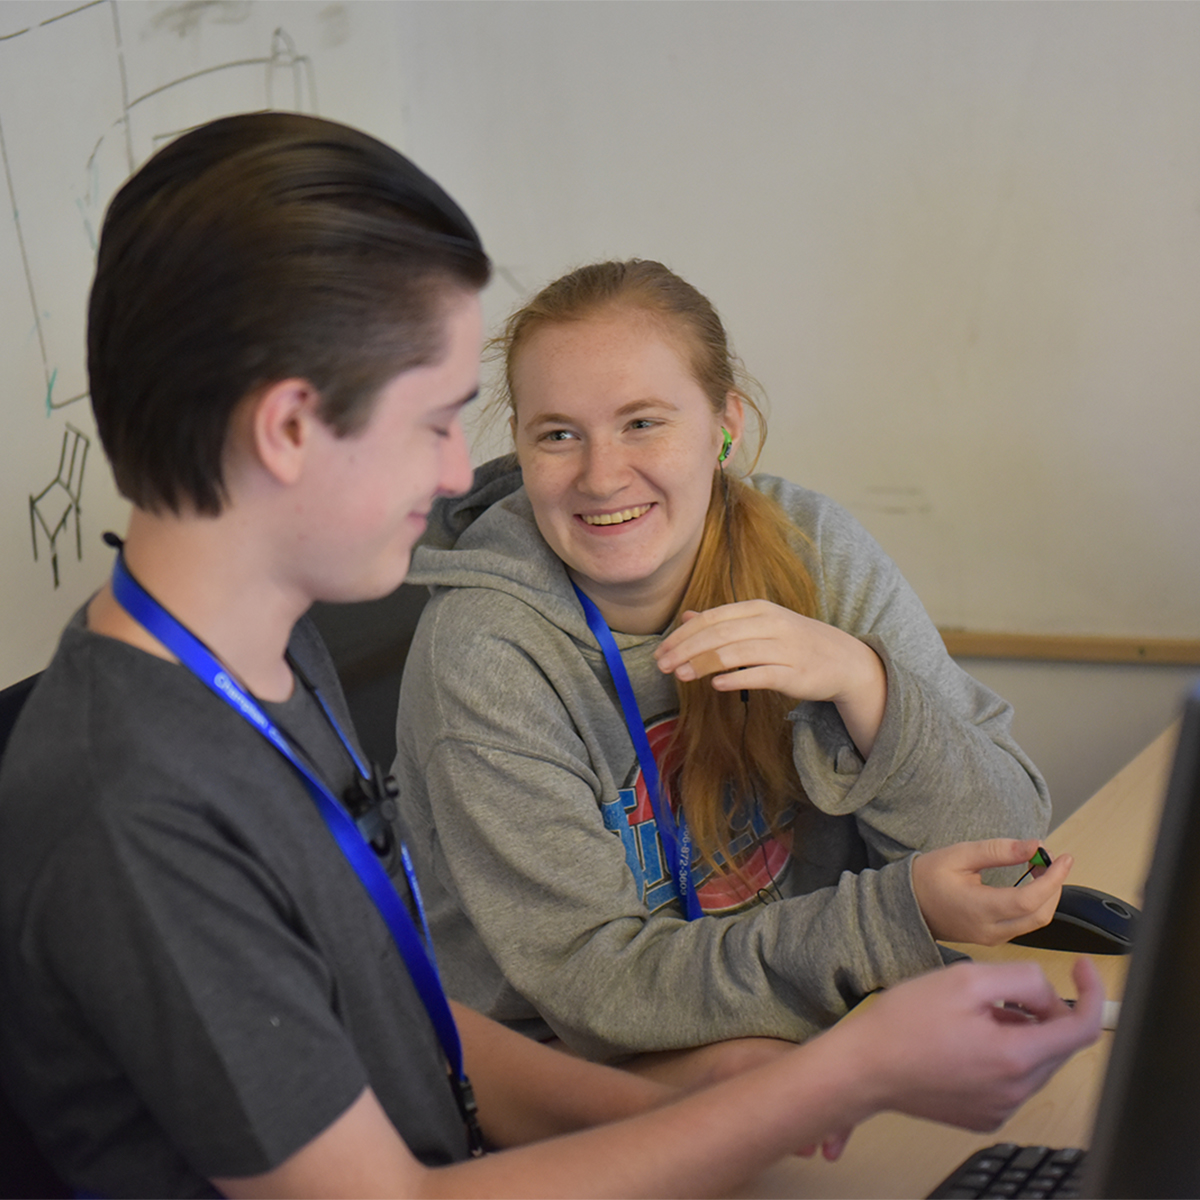 Students laughing and working on a computer project